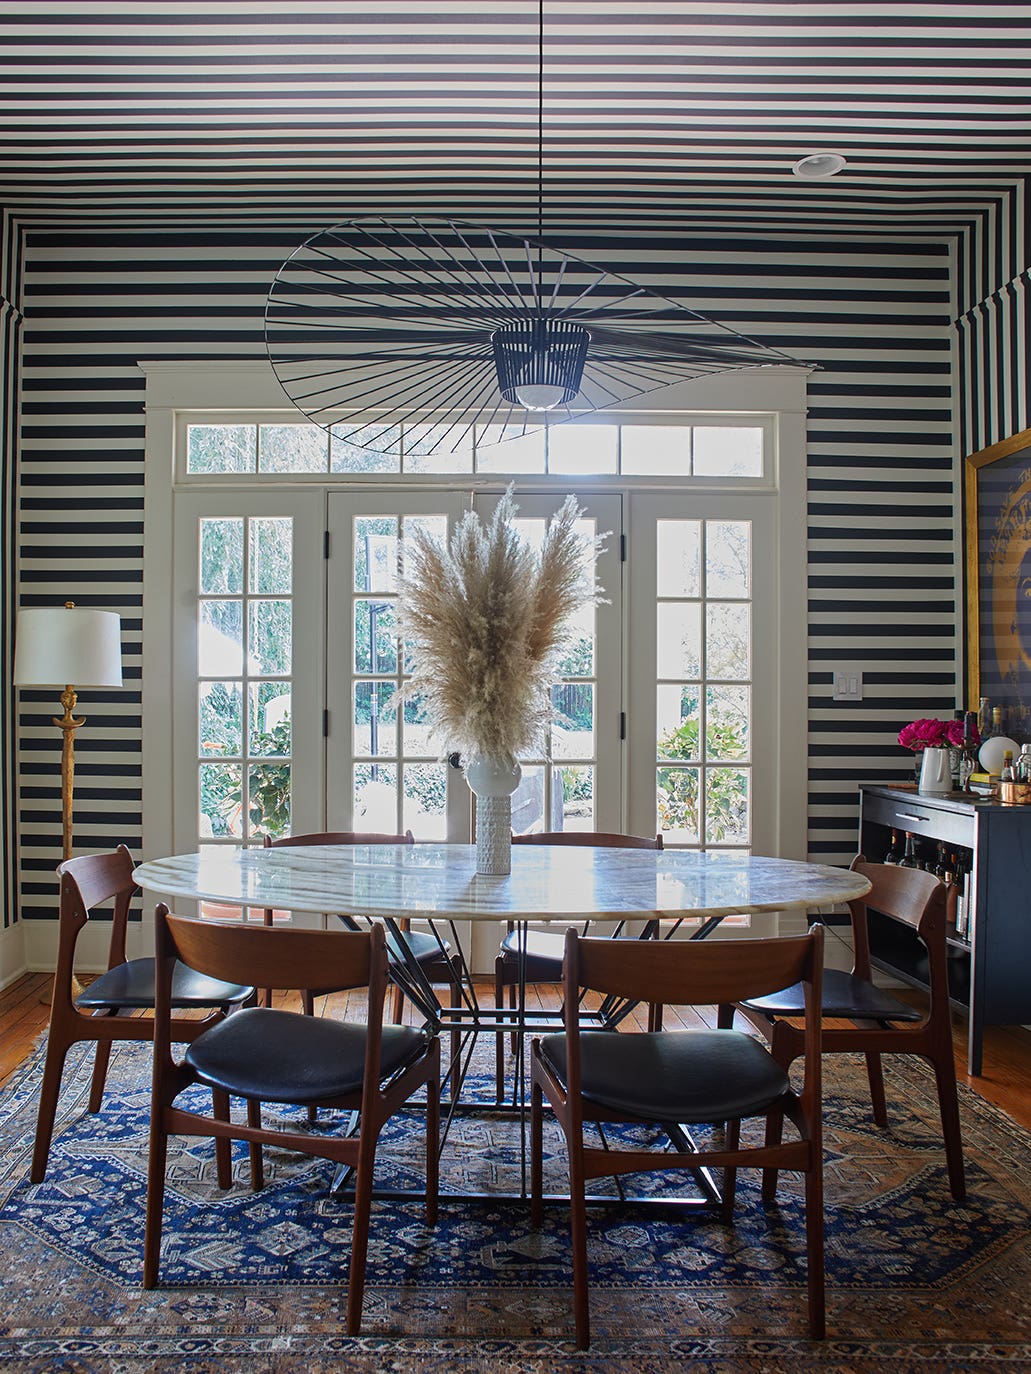 For Her Own Family Home, This Atlanta Designer Discovered Her Inner Earthy Maximalist